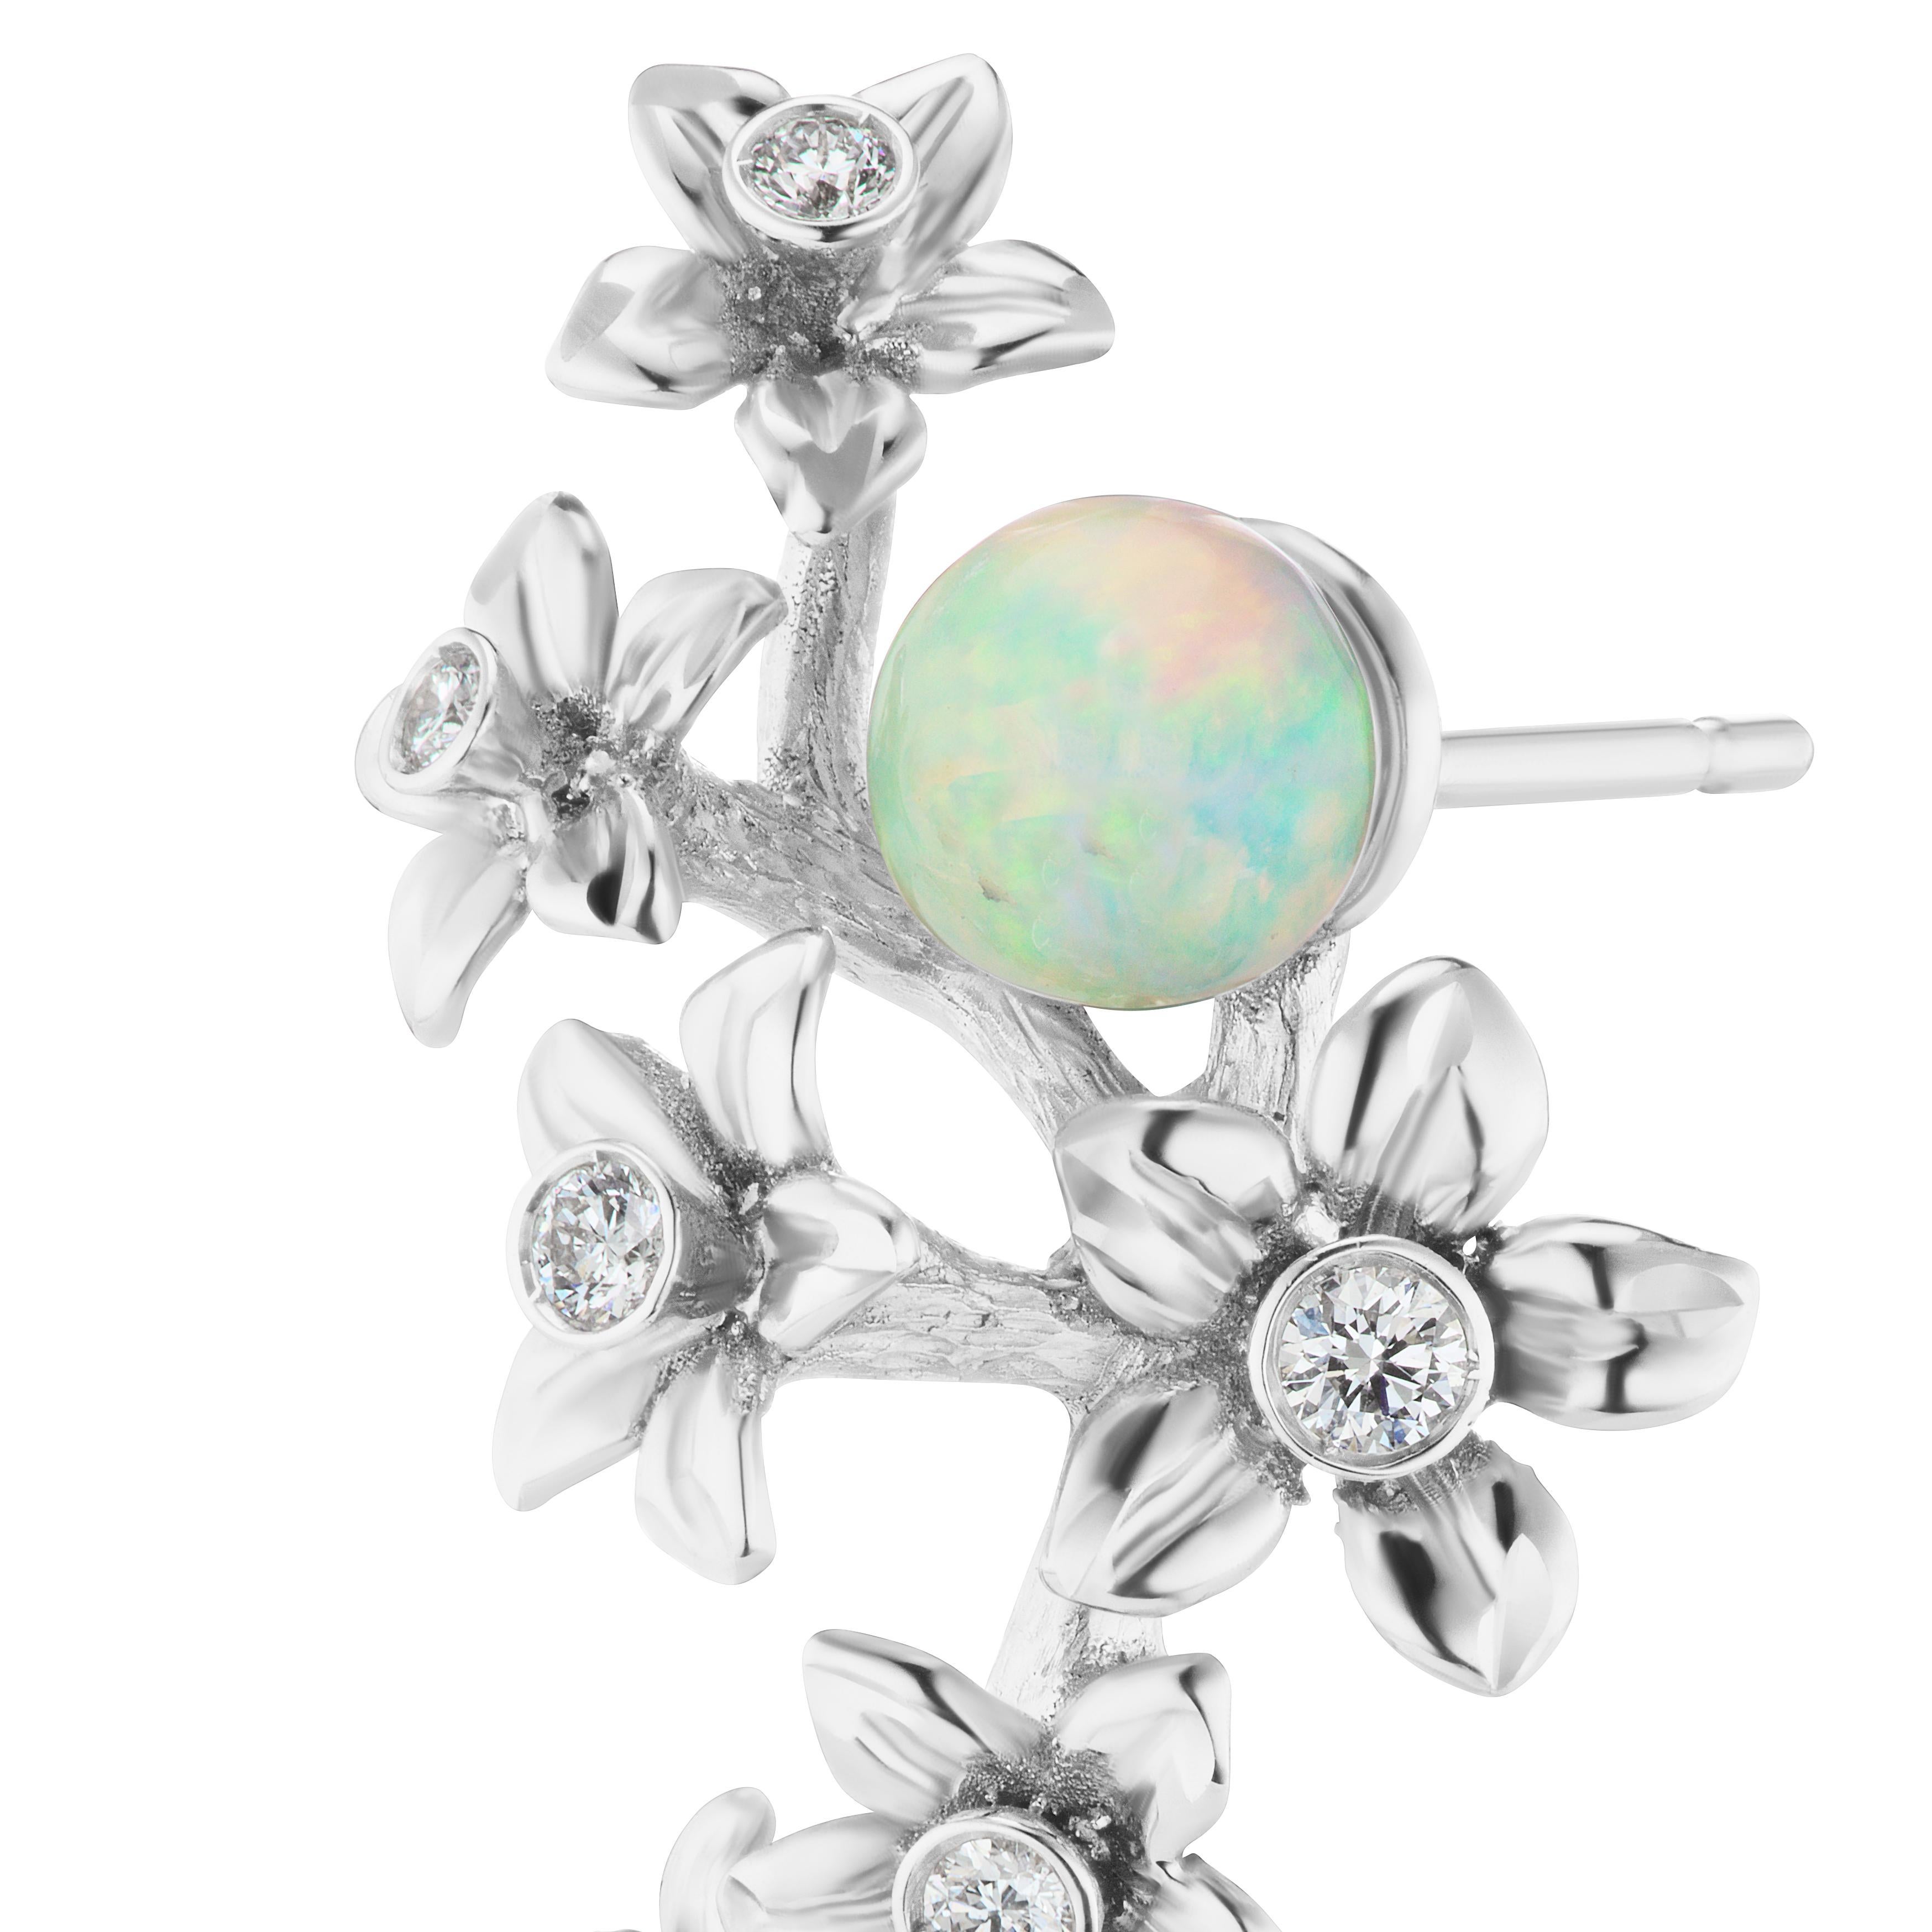 18K White Gold Star Jasmine Vine Earrings with Diamond and Opal Flowers.
Diamond accents 0.43 ct tw.
2